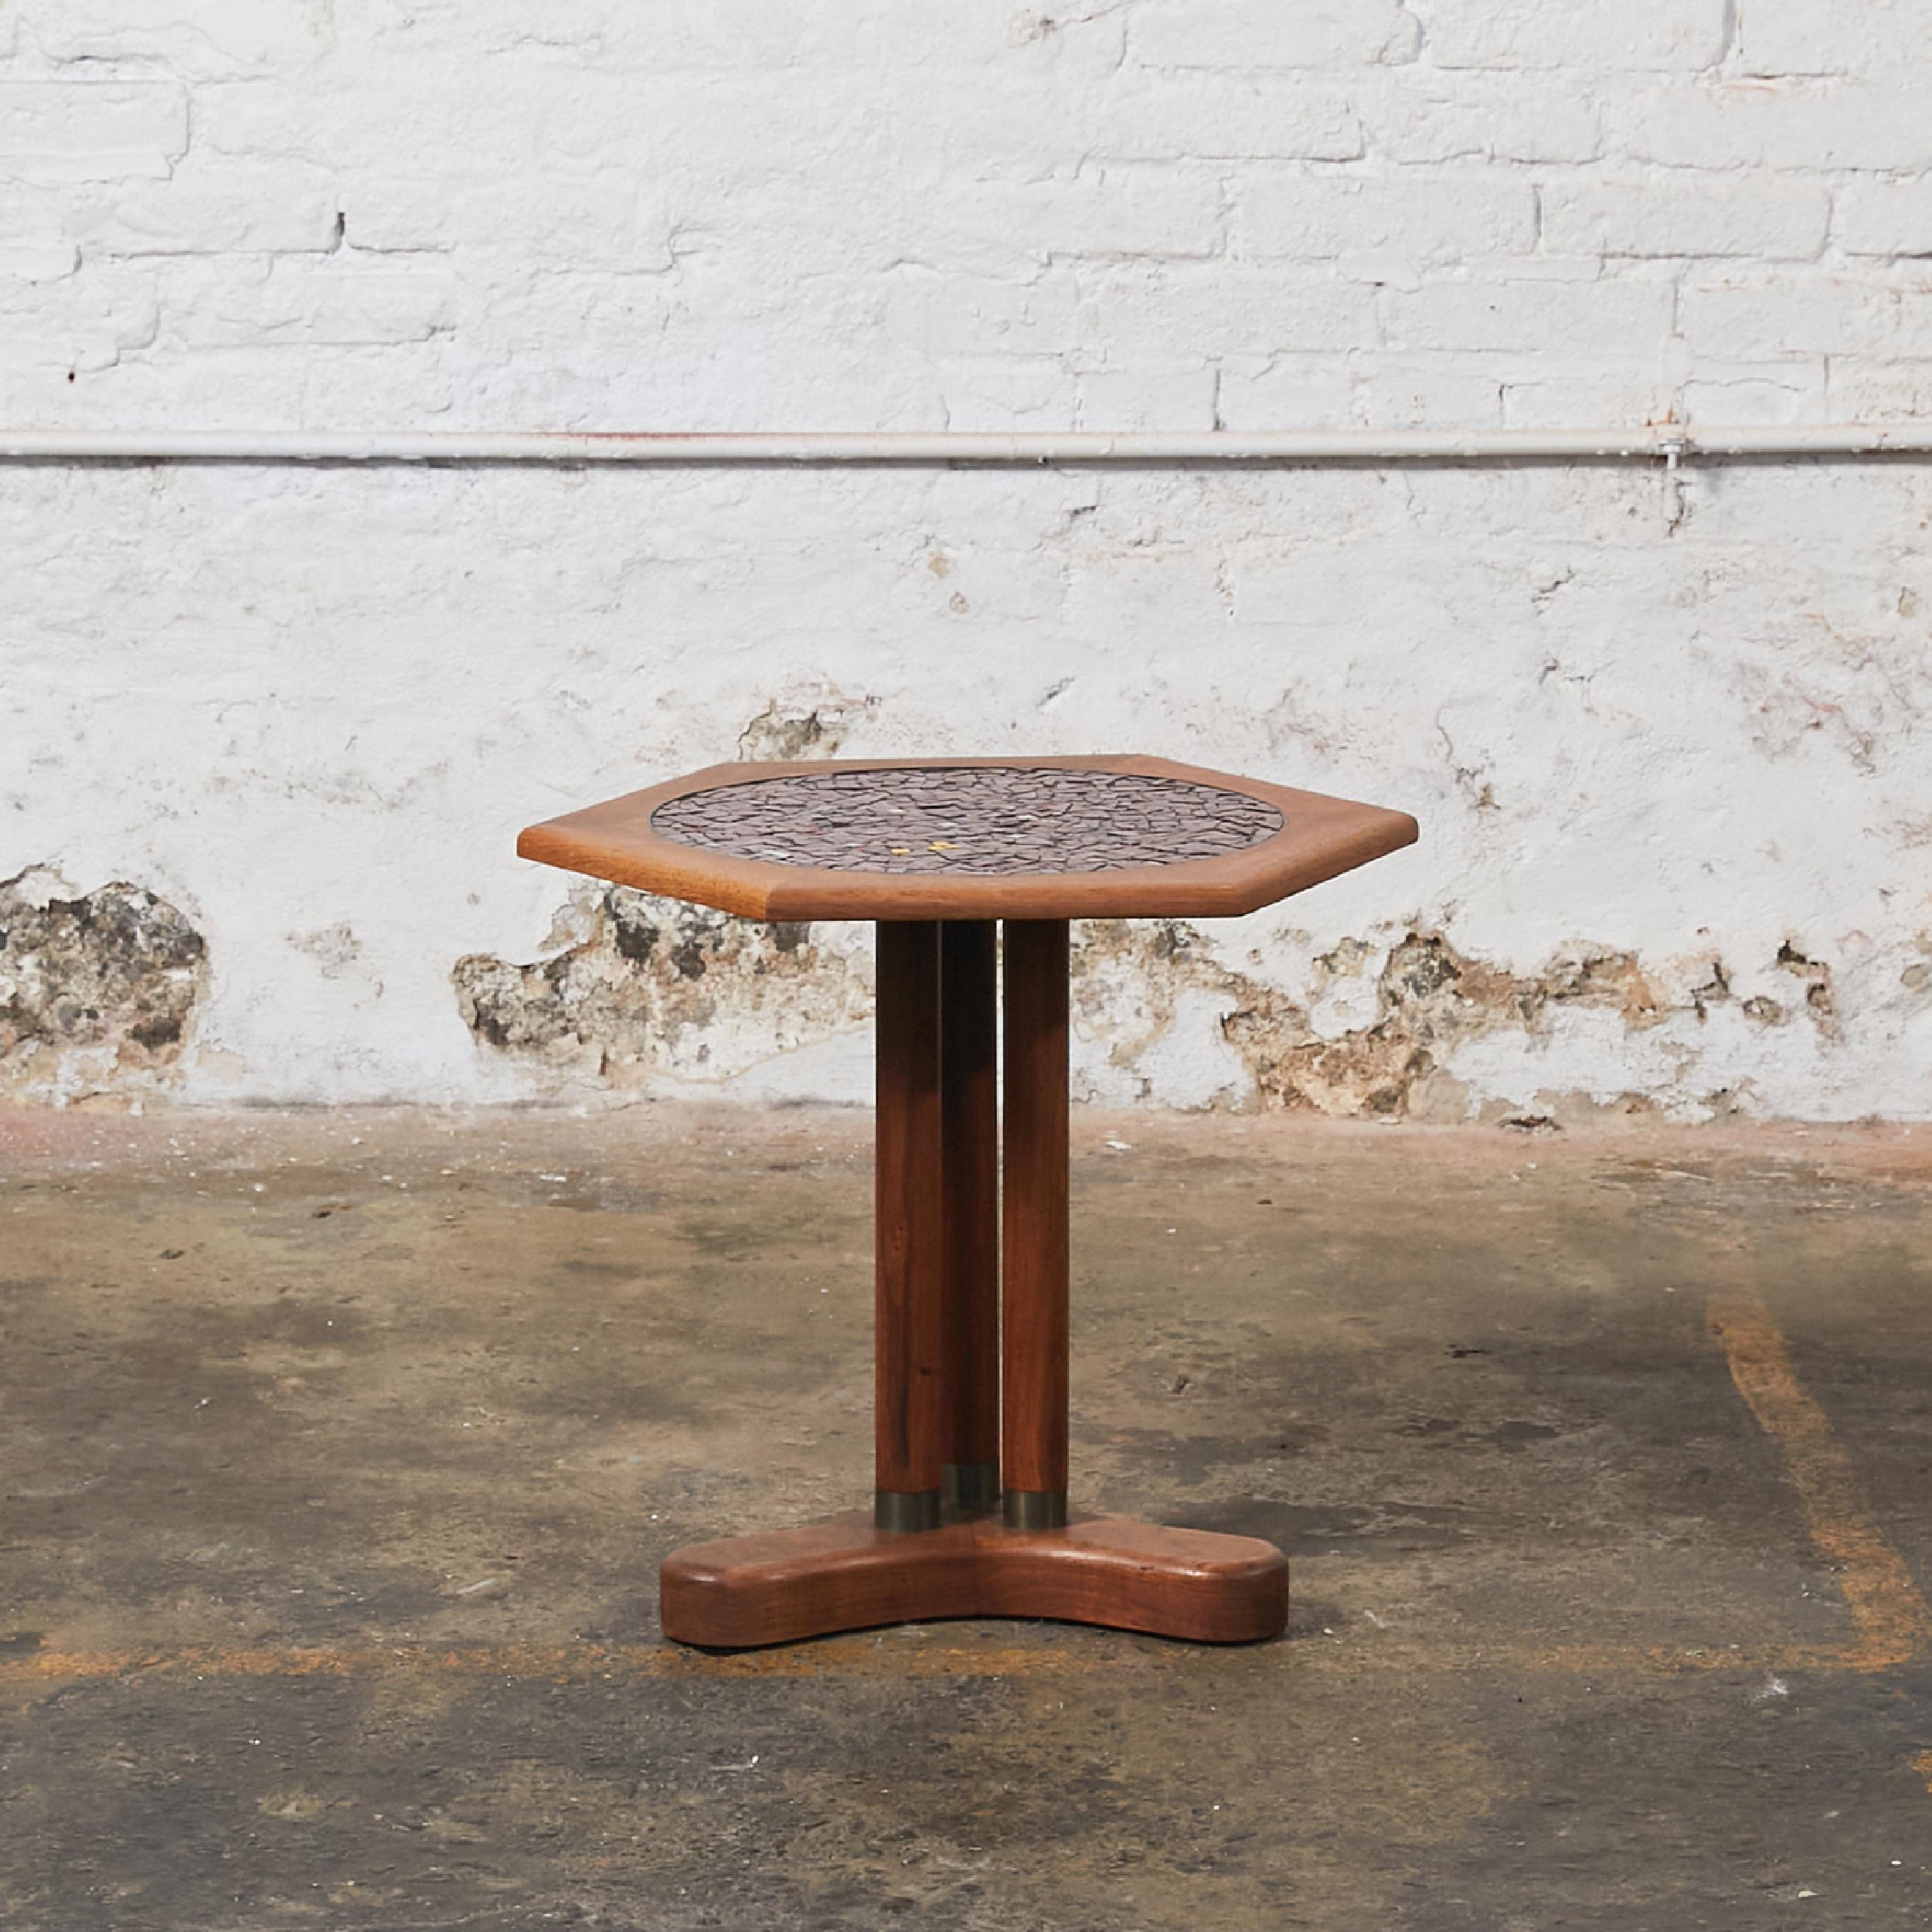 Hexagonal midcentury side table in the style of Gordon & Jane Martz. The table top is inlaid in glass mosaic in different shades of dusty pink, with sparks of yellows and blacks. The top sits on three cylindrical legs with bronze end, resting on